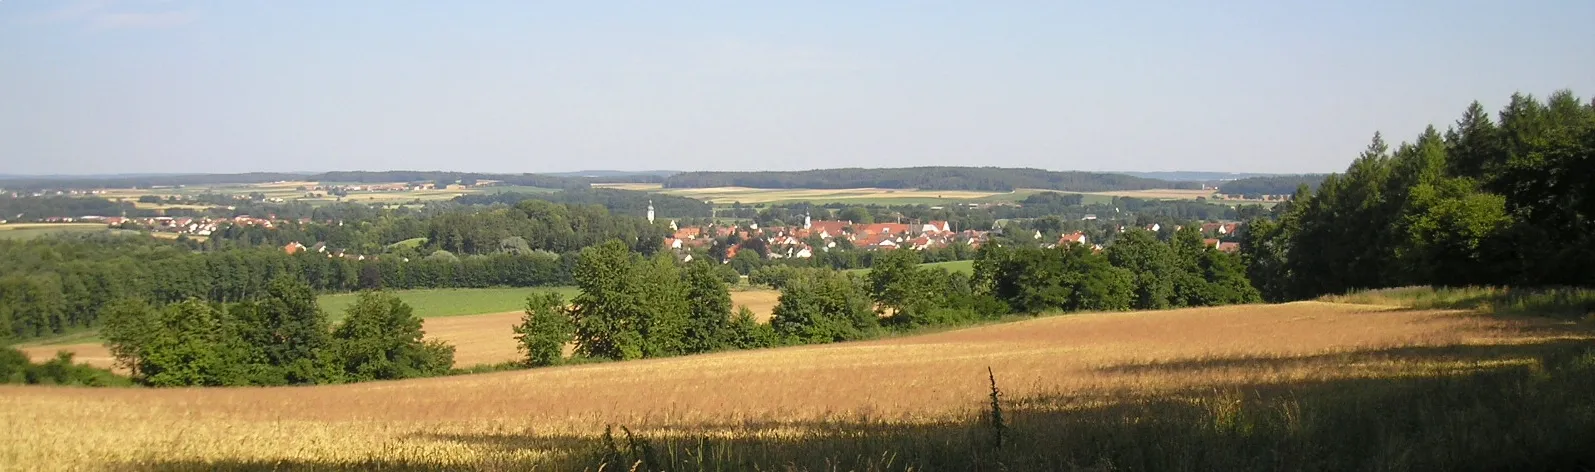 Image of Pöttmes